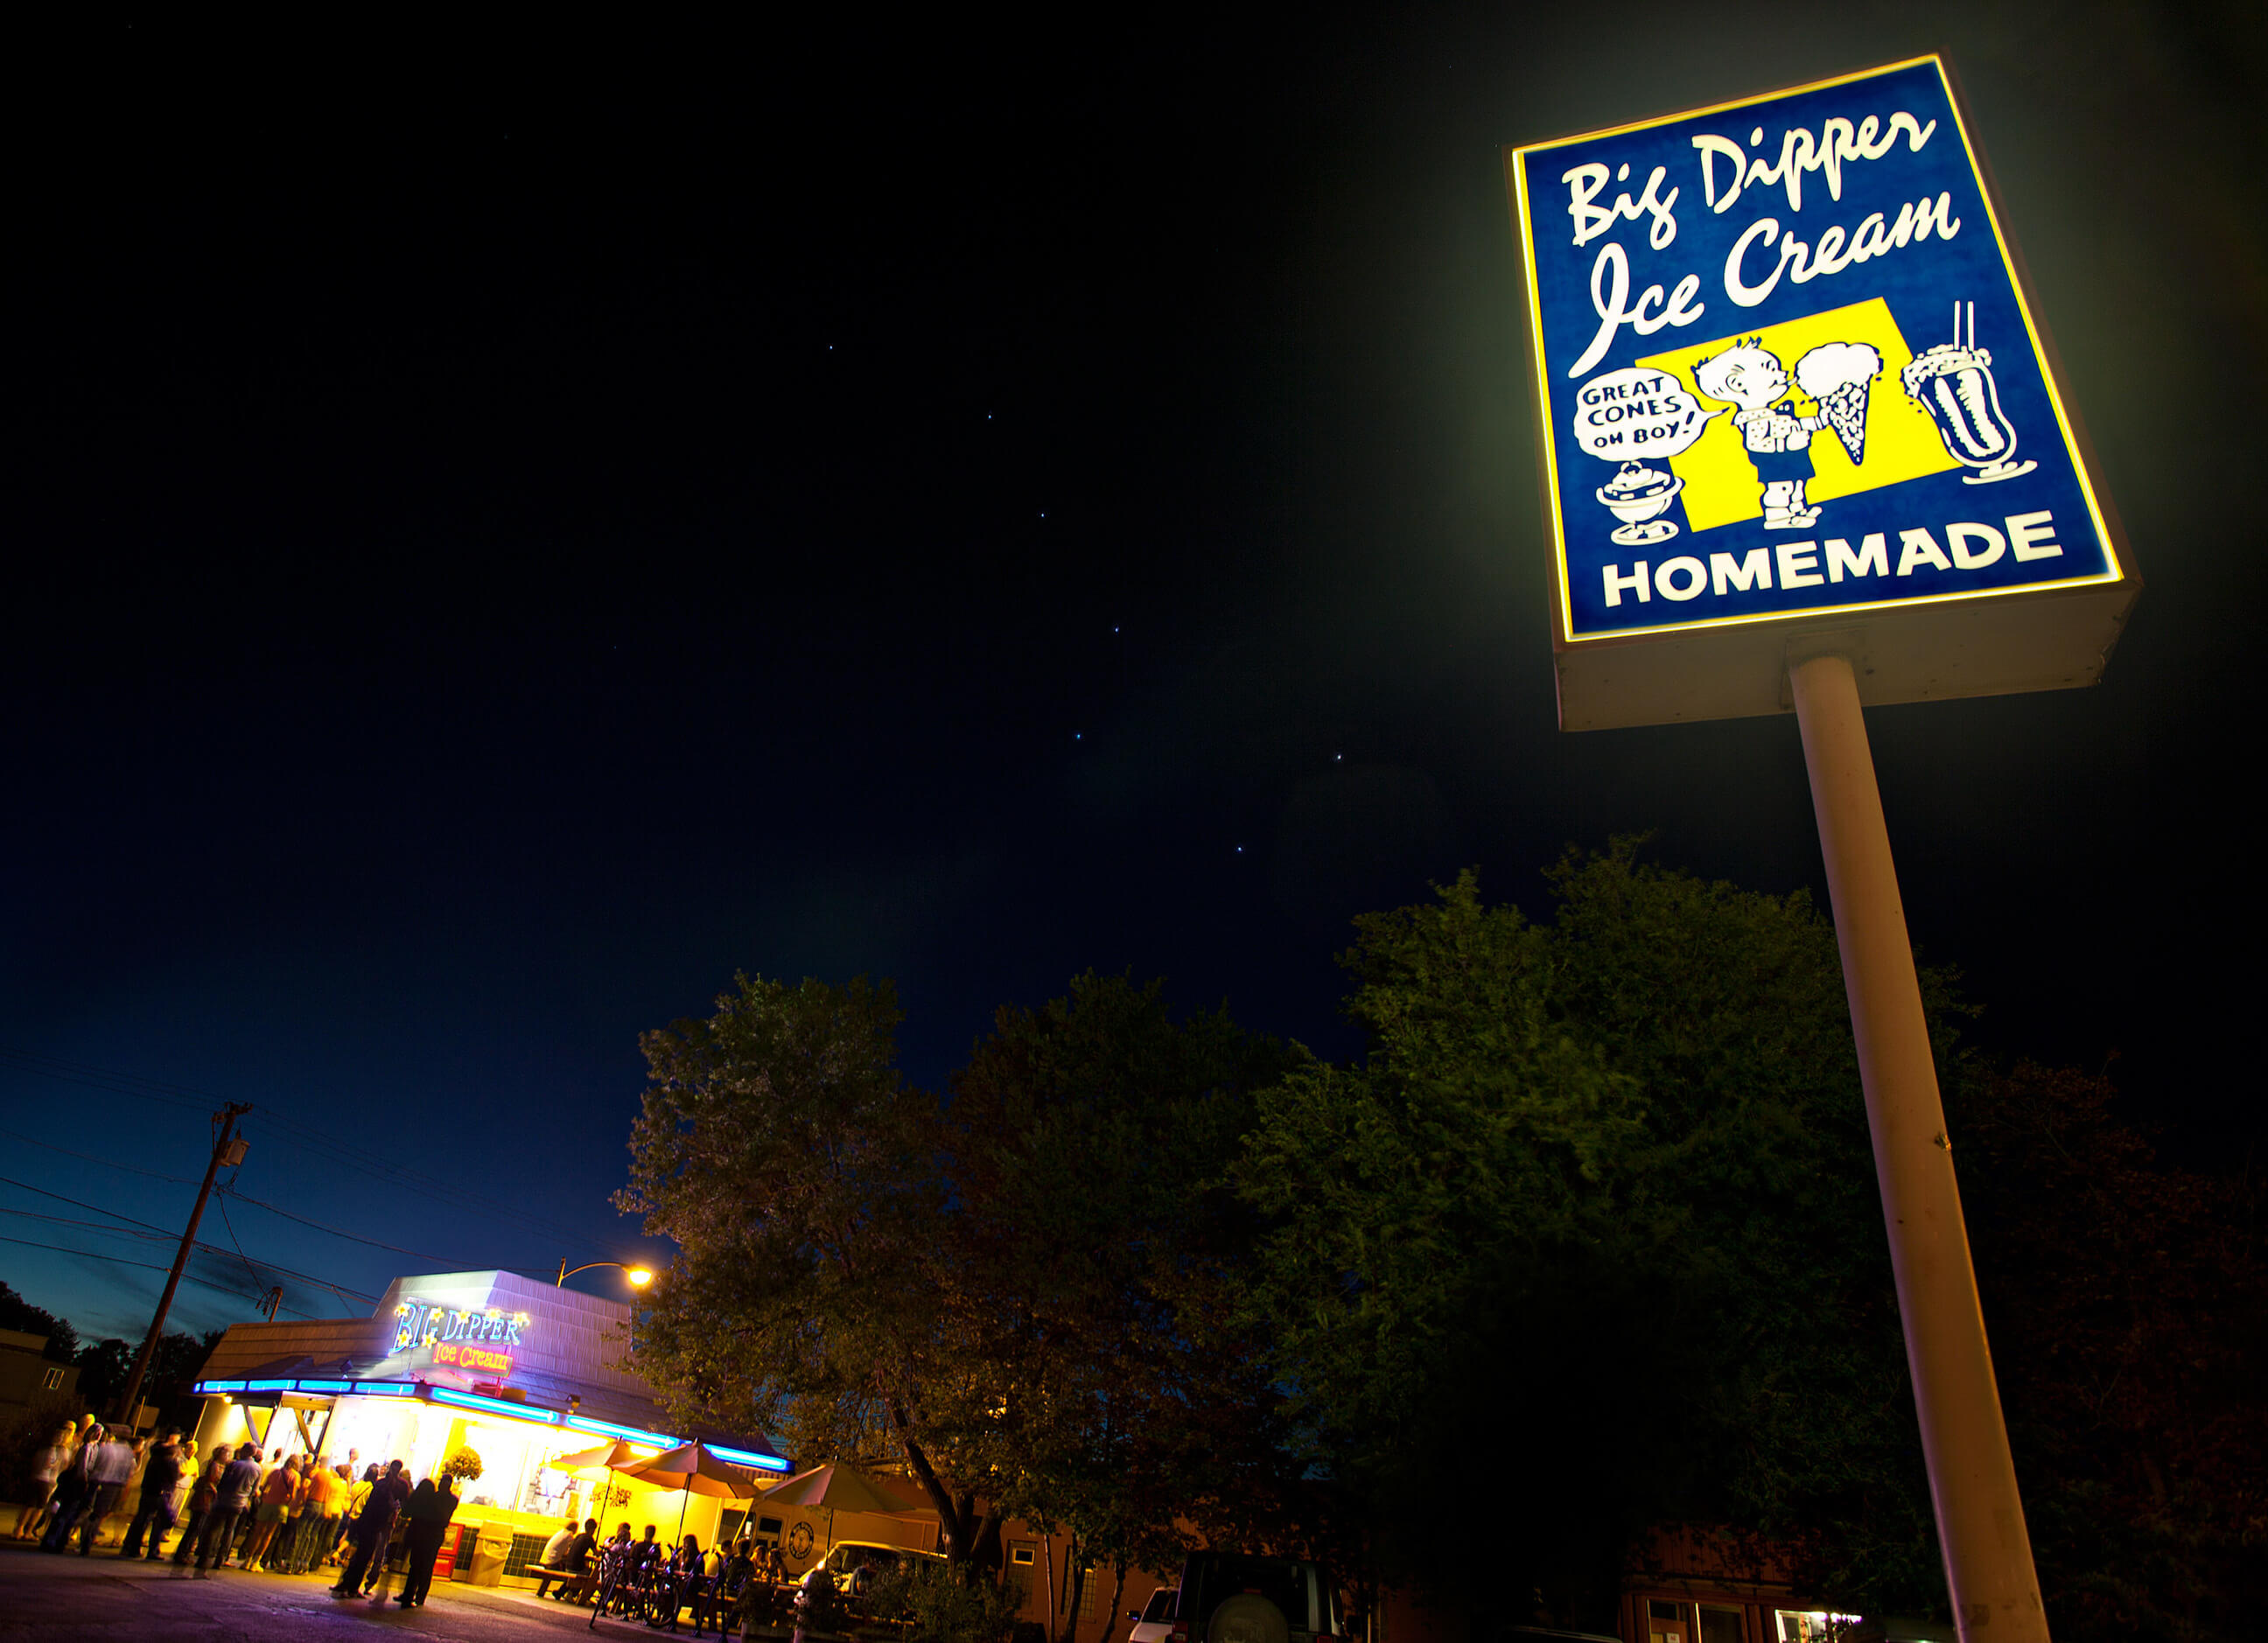 The big dipper constellation glows brightly behind Big Dipper Ice Cream in Missoula Montana